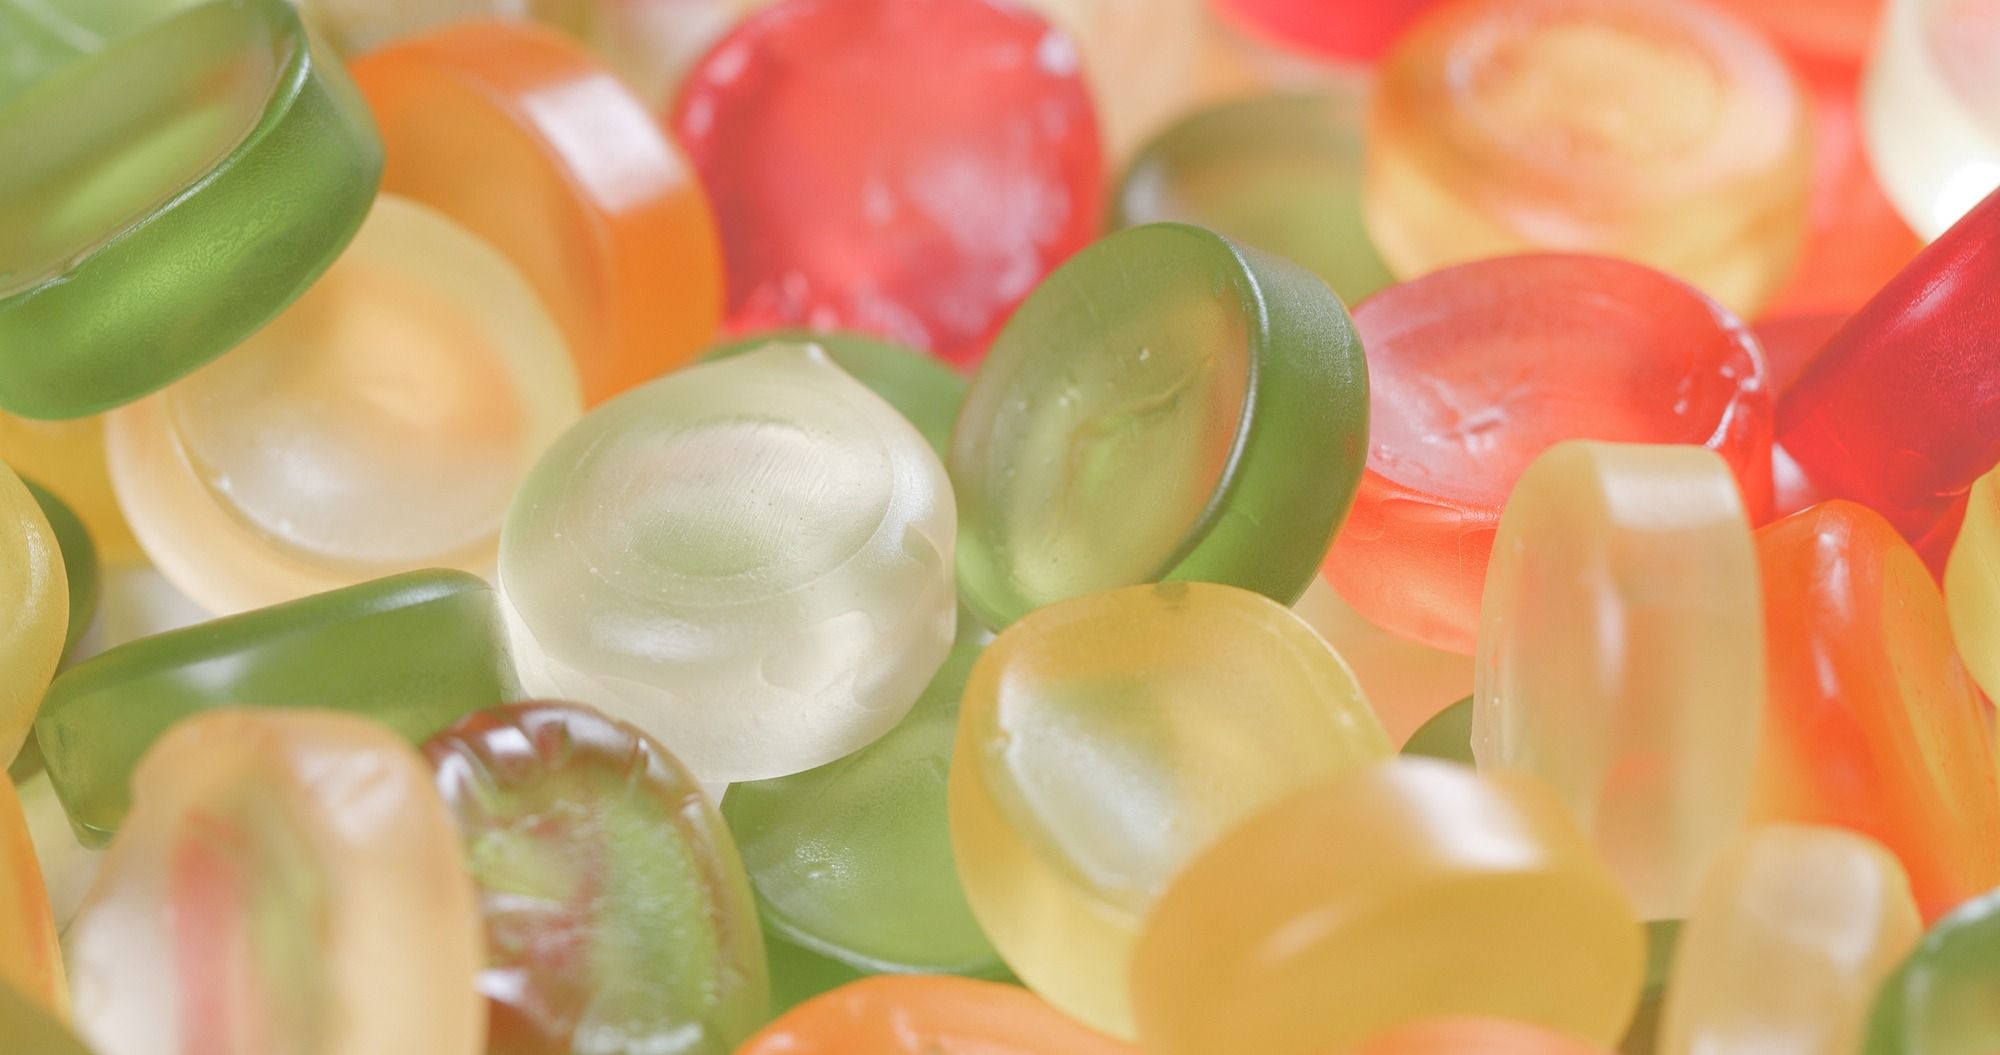 TerrAscend Mouldy Cannabis Gummies Prompt Recall of Over 330,000 Units